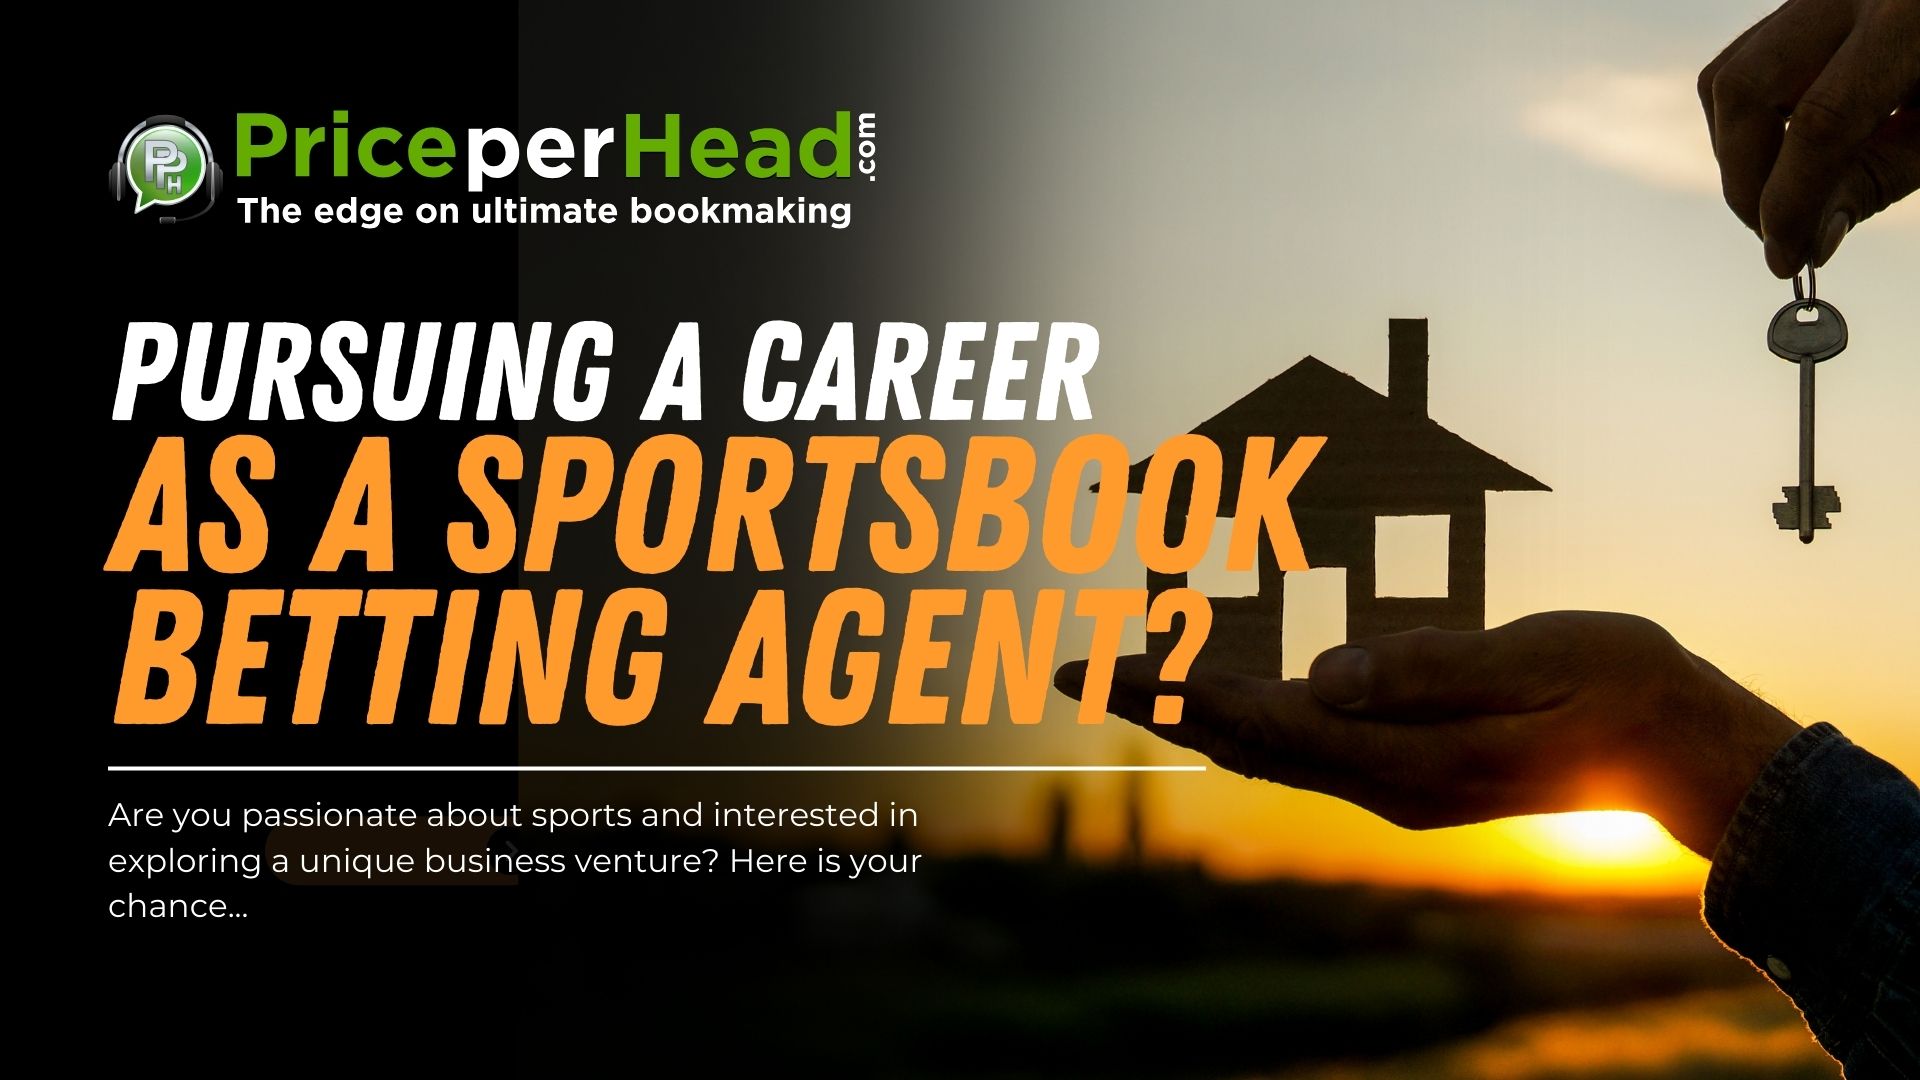 persuing a career as a sportsbook betting agent? pay per head service, price per head